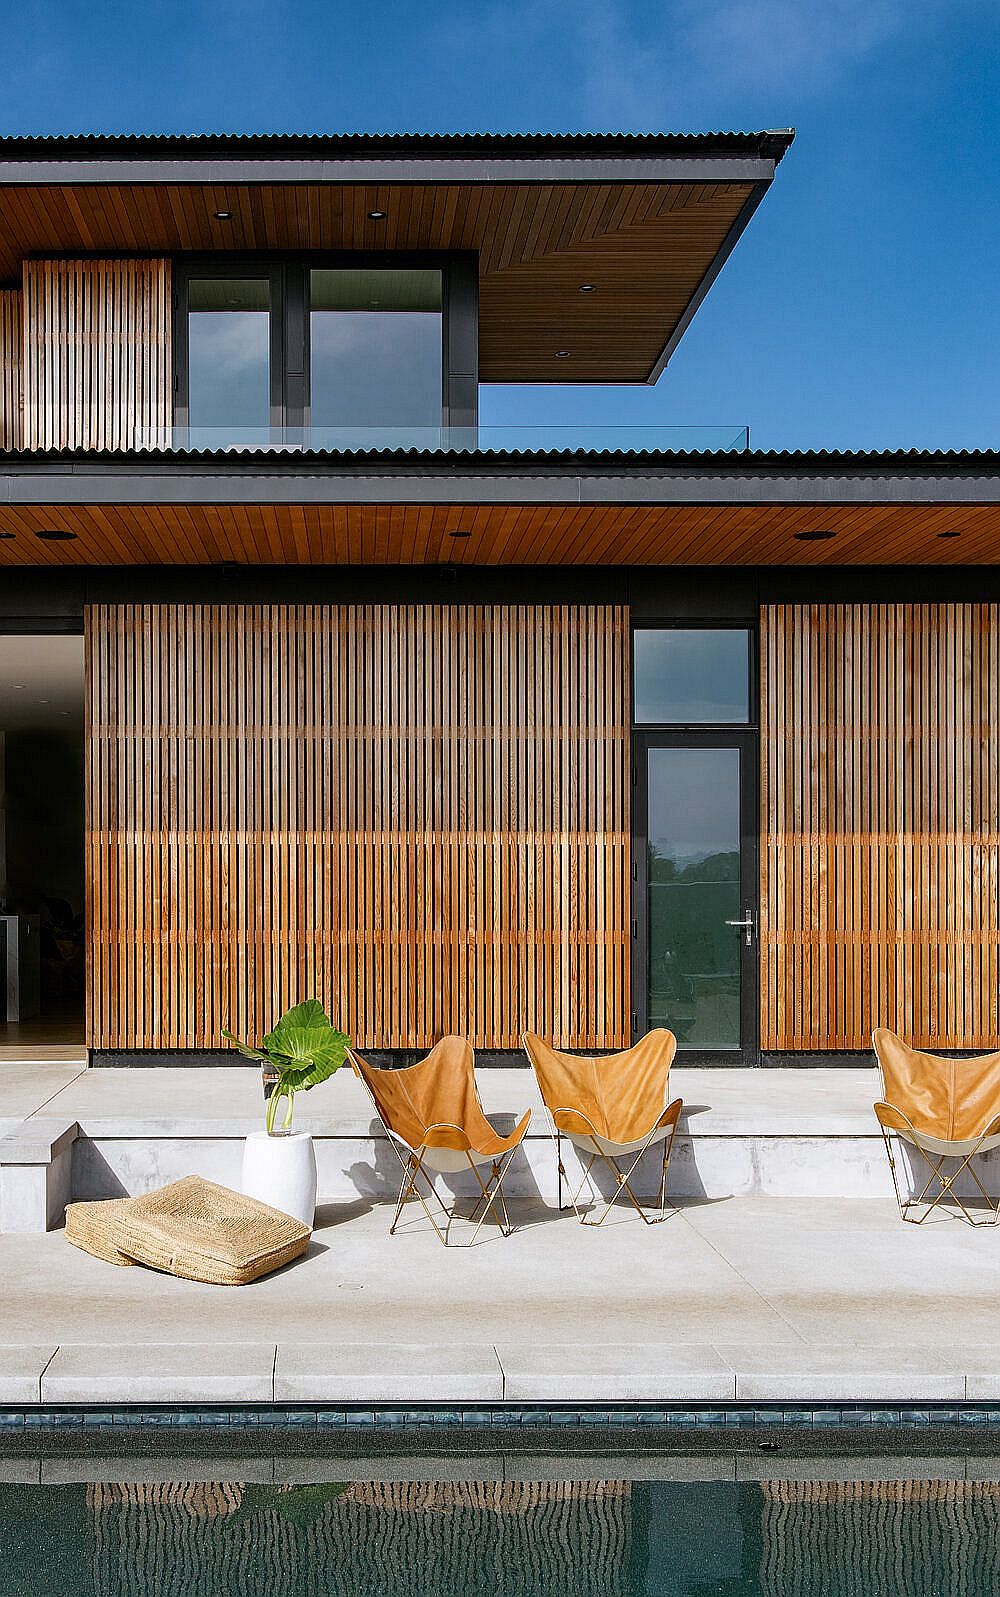 Butterfly-chairs-on-the-deck-next-to-the-pool-offers-a-relaxing-spot-to-enjoy-the-views-outside-69008